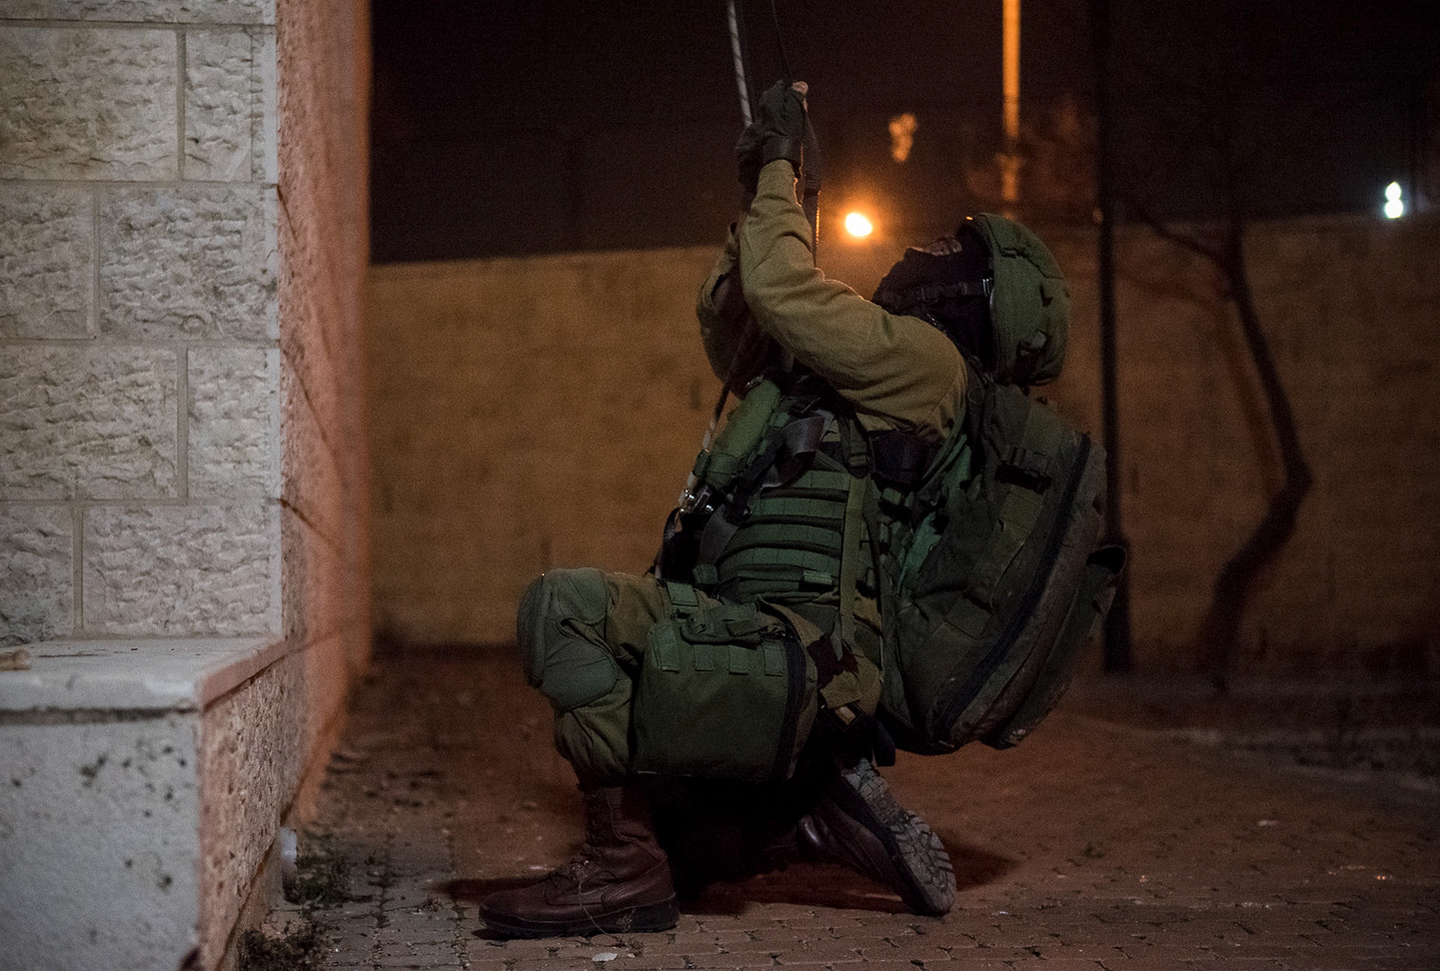 The Lotar counter-terror unit practiced hostage saving in an urban area environment. (IDF)